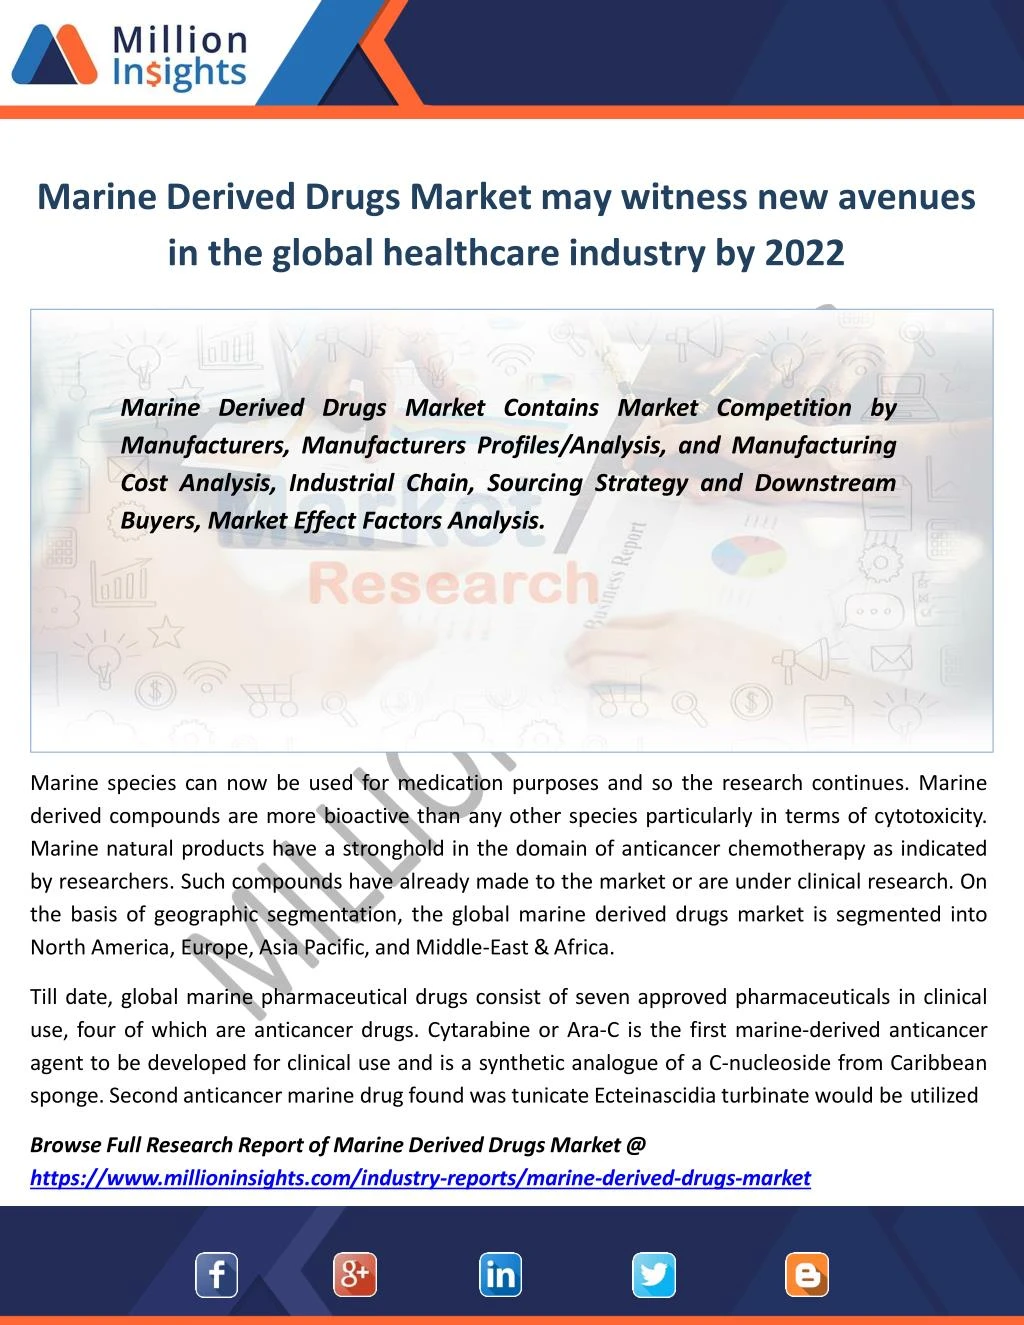 marine derived drugs market may witness new avenues in the global healthcare industry by 2022